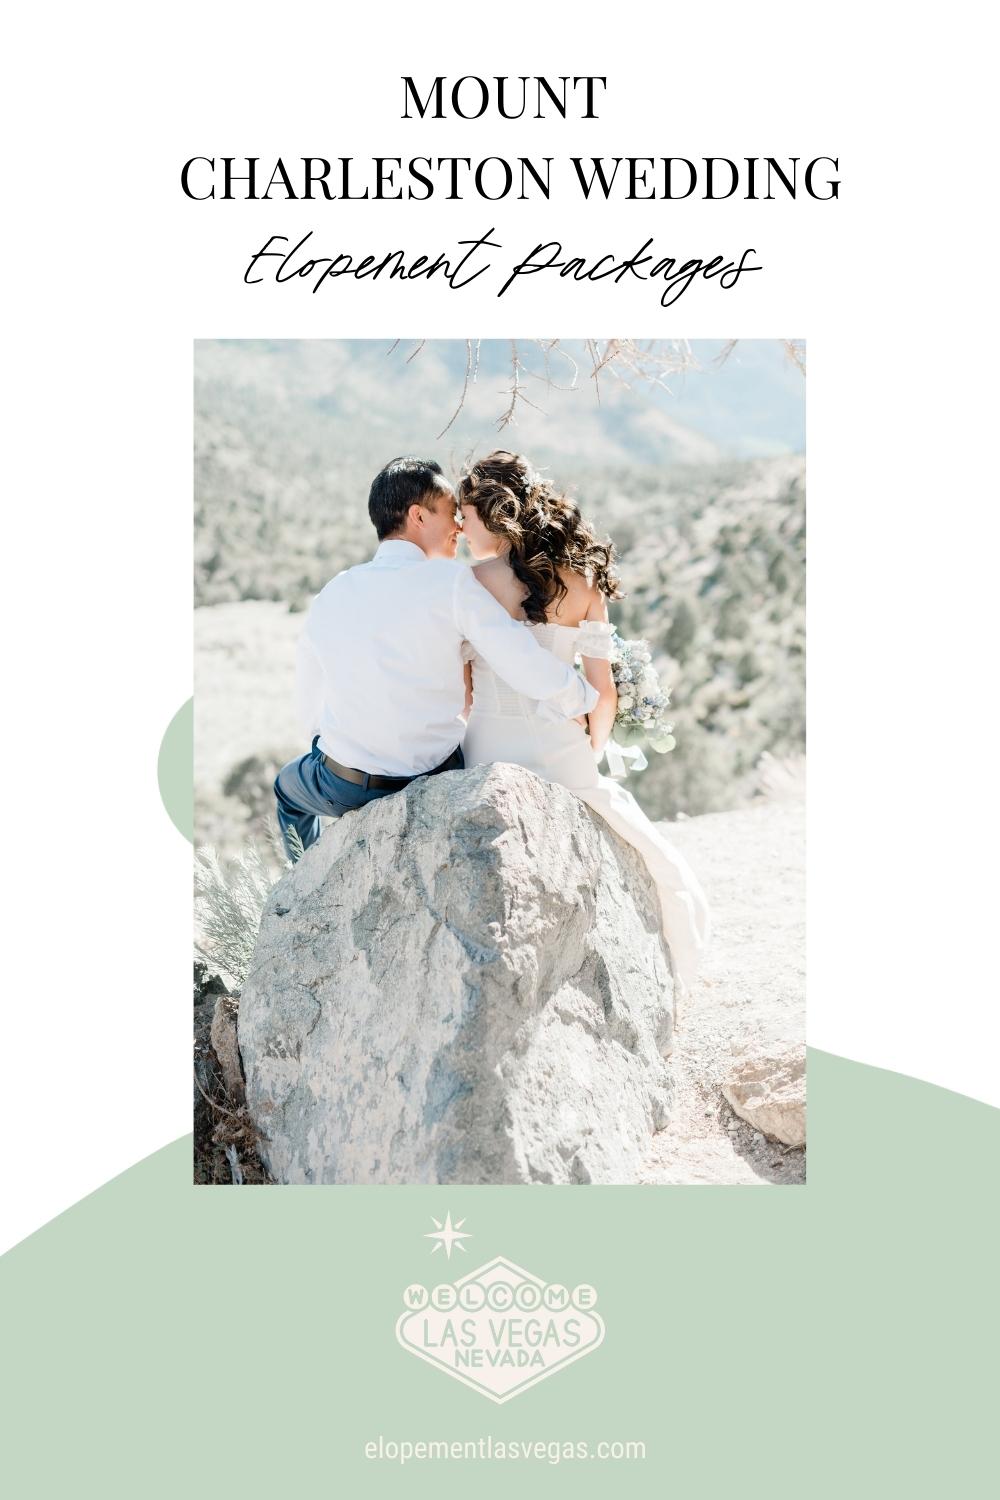 Couple sitting on rock while sharing an embrace; image overlaid with text that reads Mount Charleston Wedding Elopement Packages